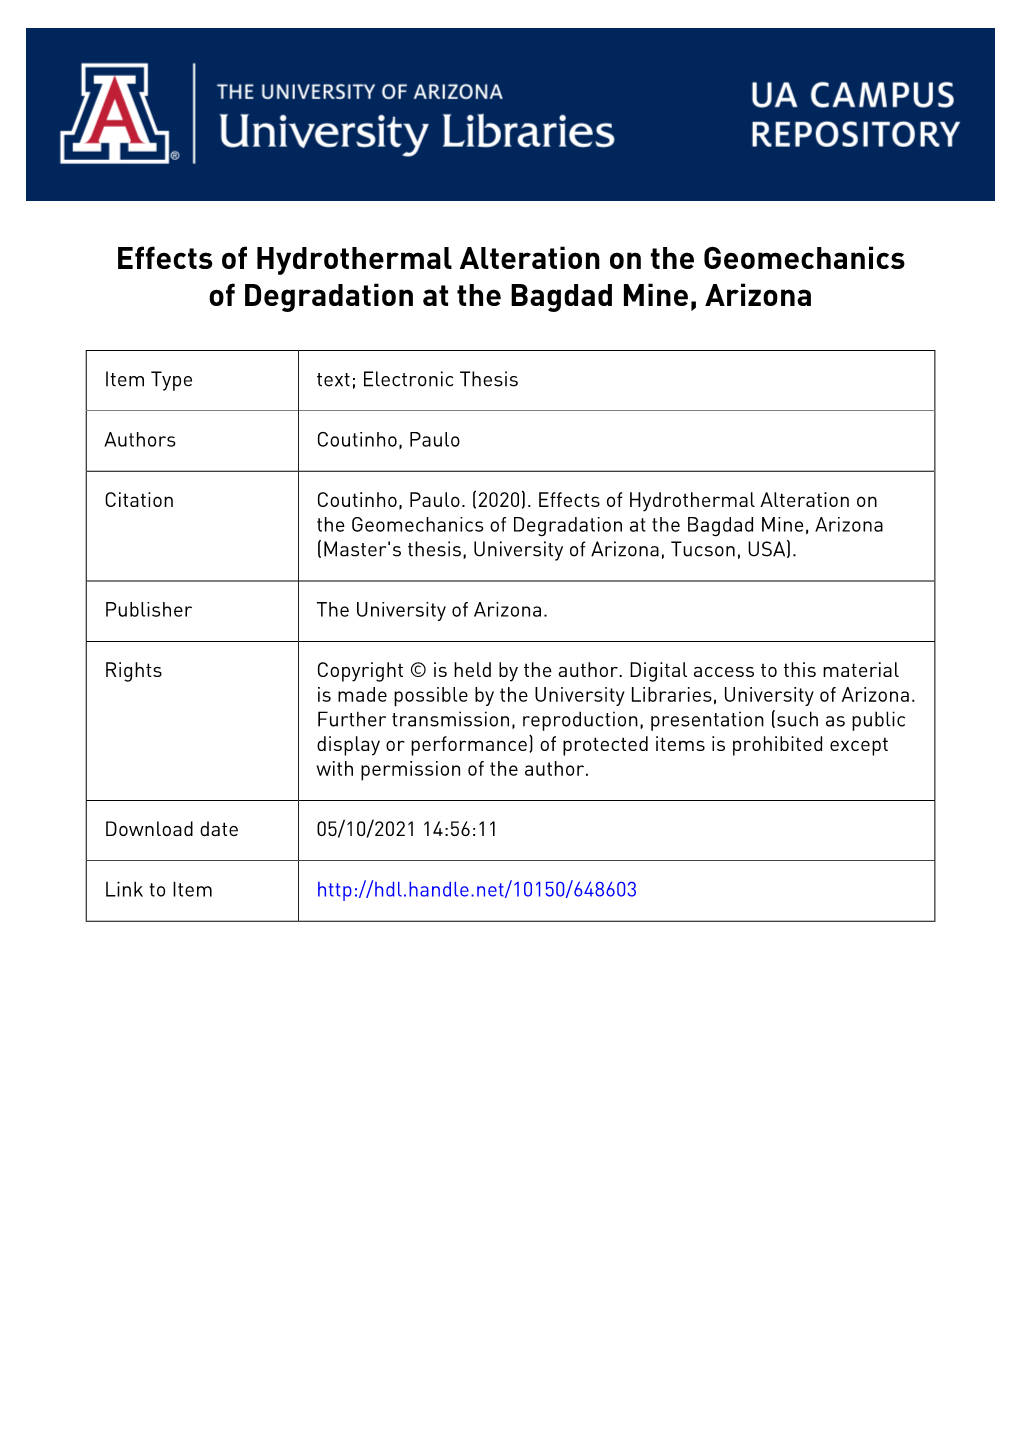 Effects of Hydrothermal Alteration on the Geomechanics of Degradation at the Bagdad Mine, Arizona